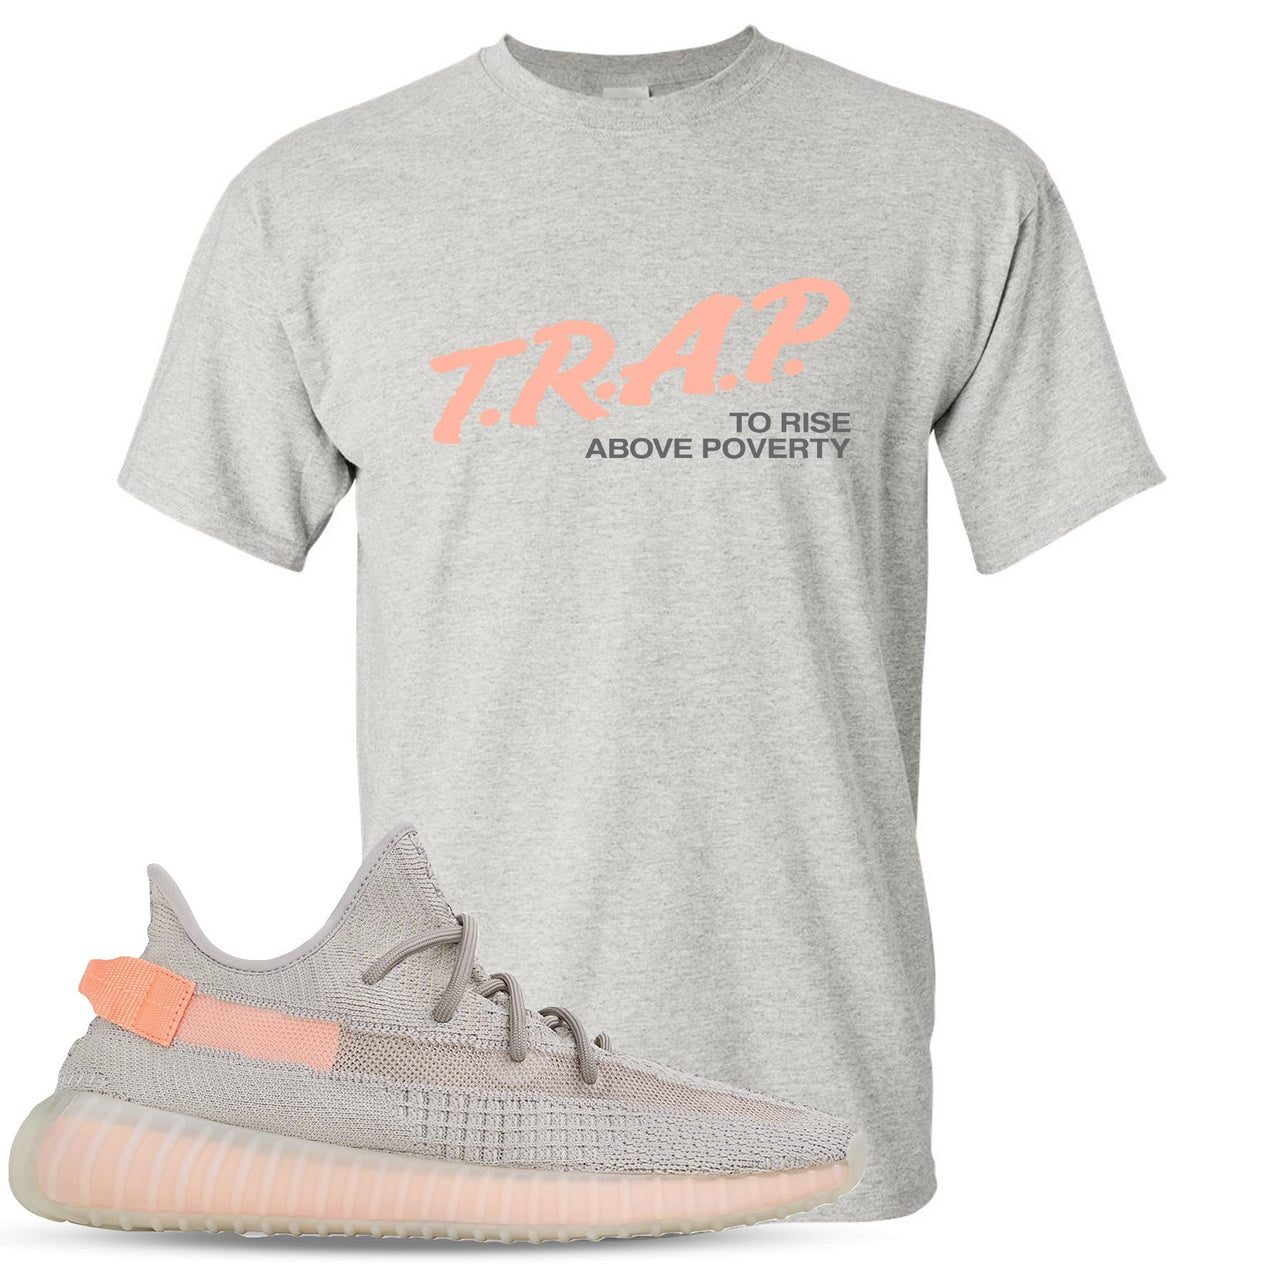 True Form v2 350s T Shirt | Trap To Rise Above Poverty, Heathered Sports Gray